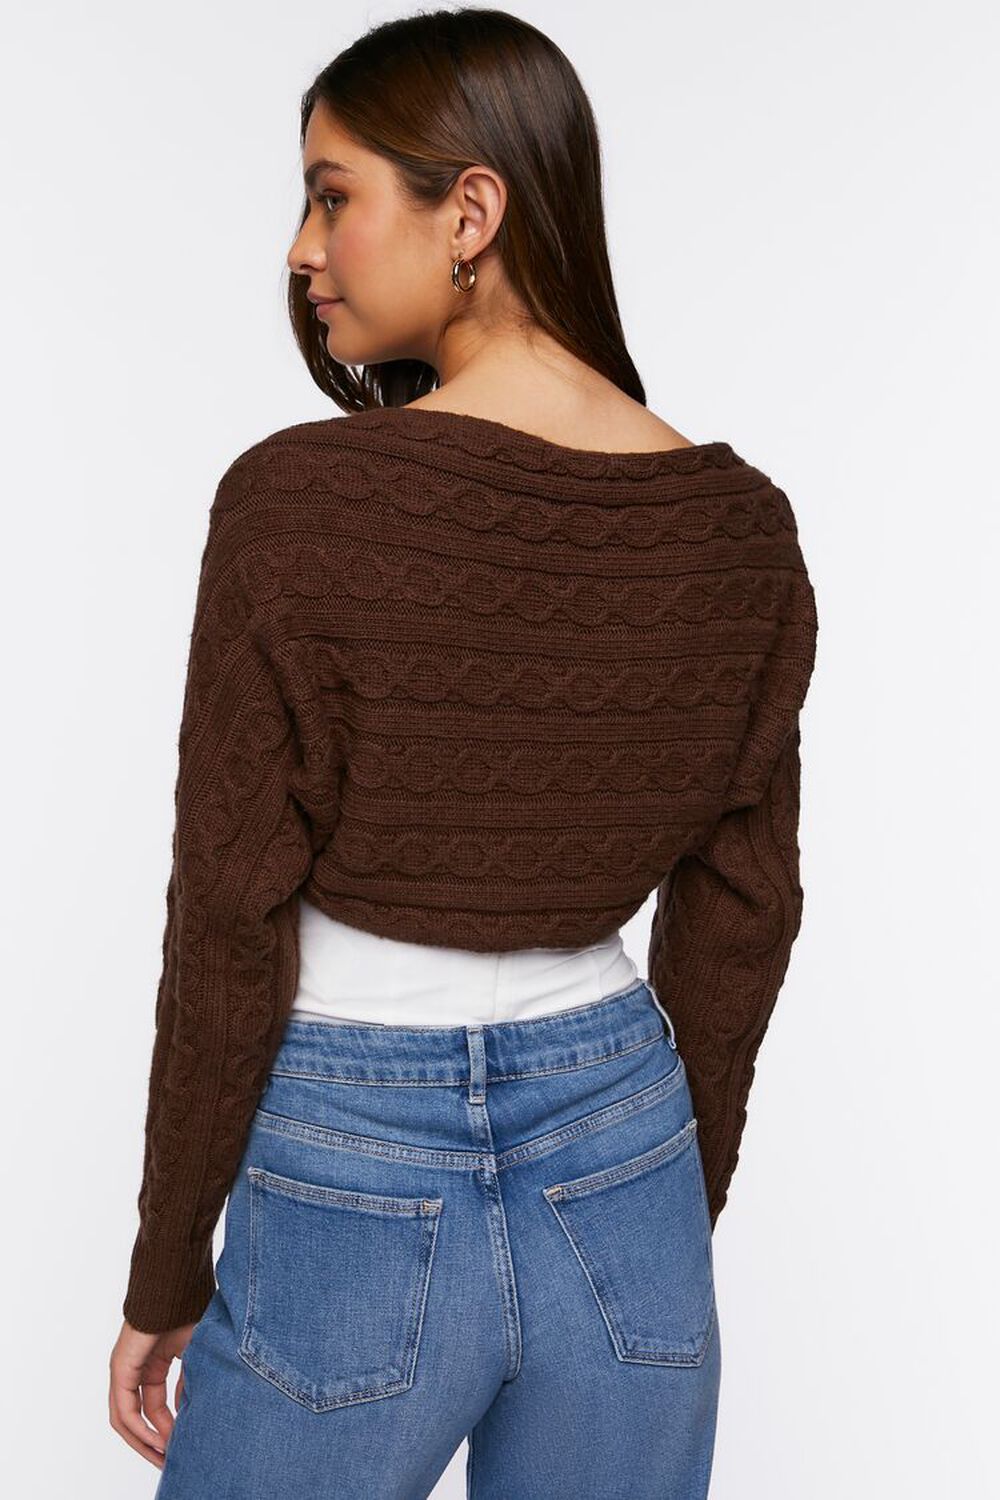 BROWN Cable Knit Shrug Sweater, image 3